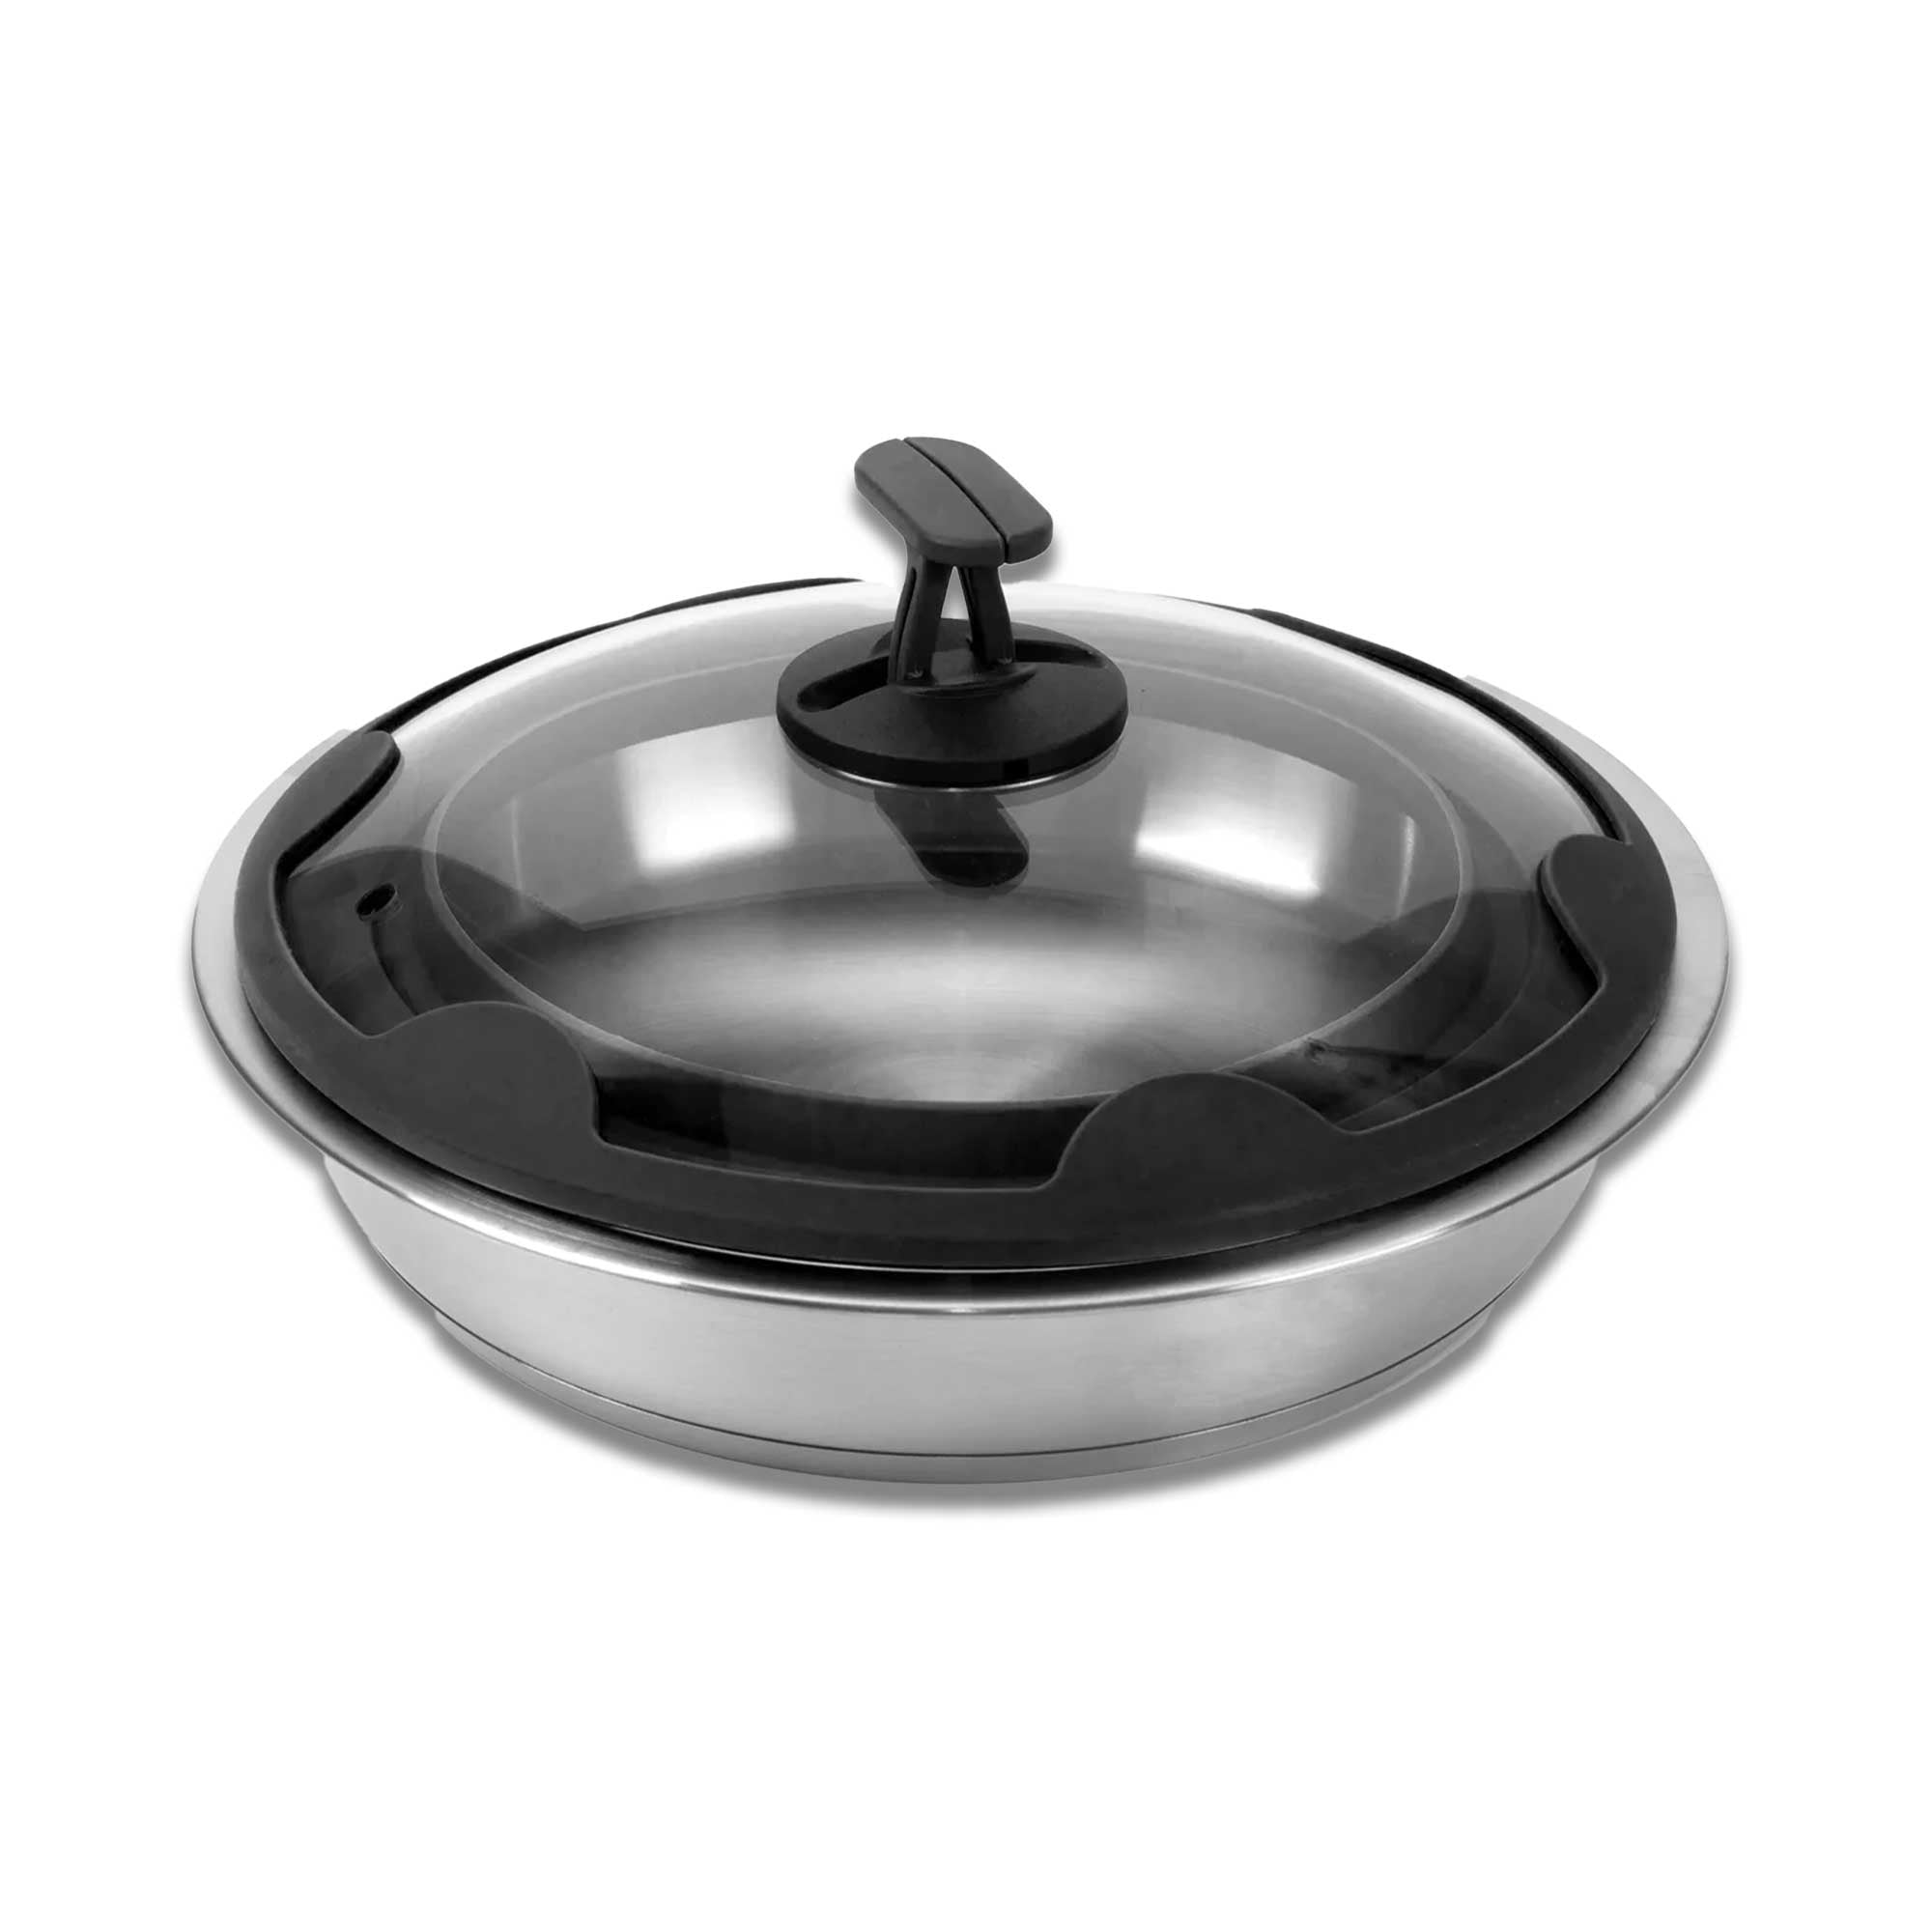 CookVision pan lid